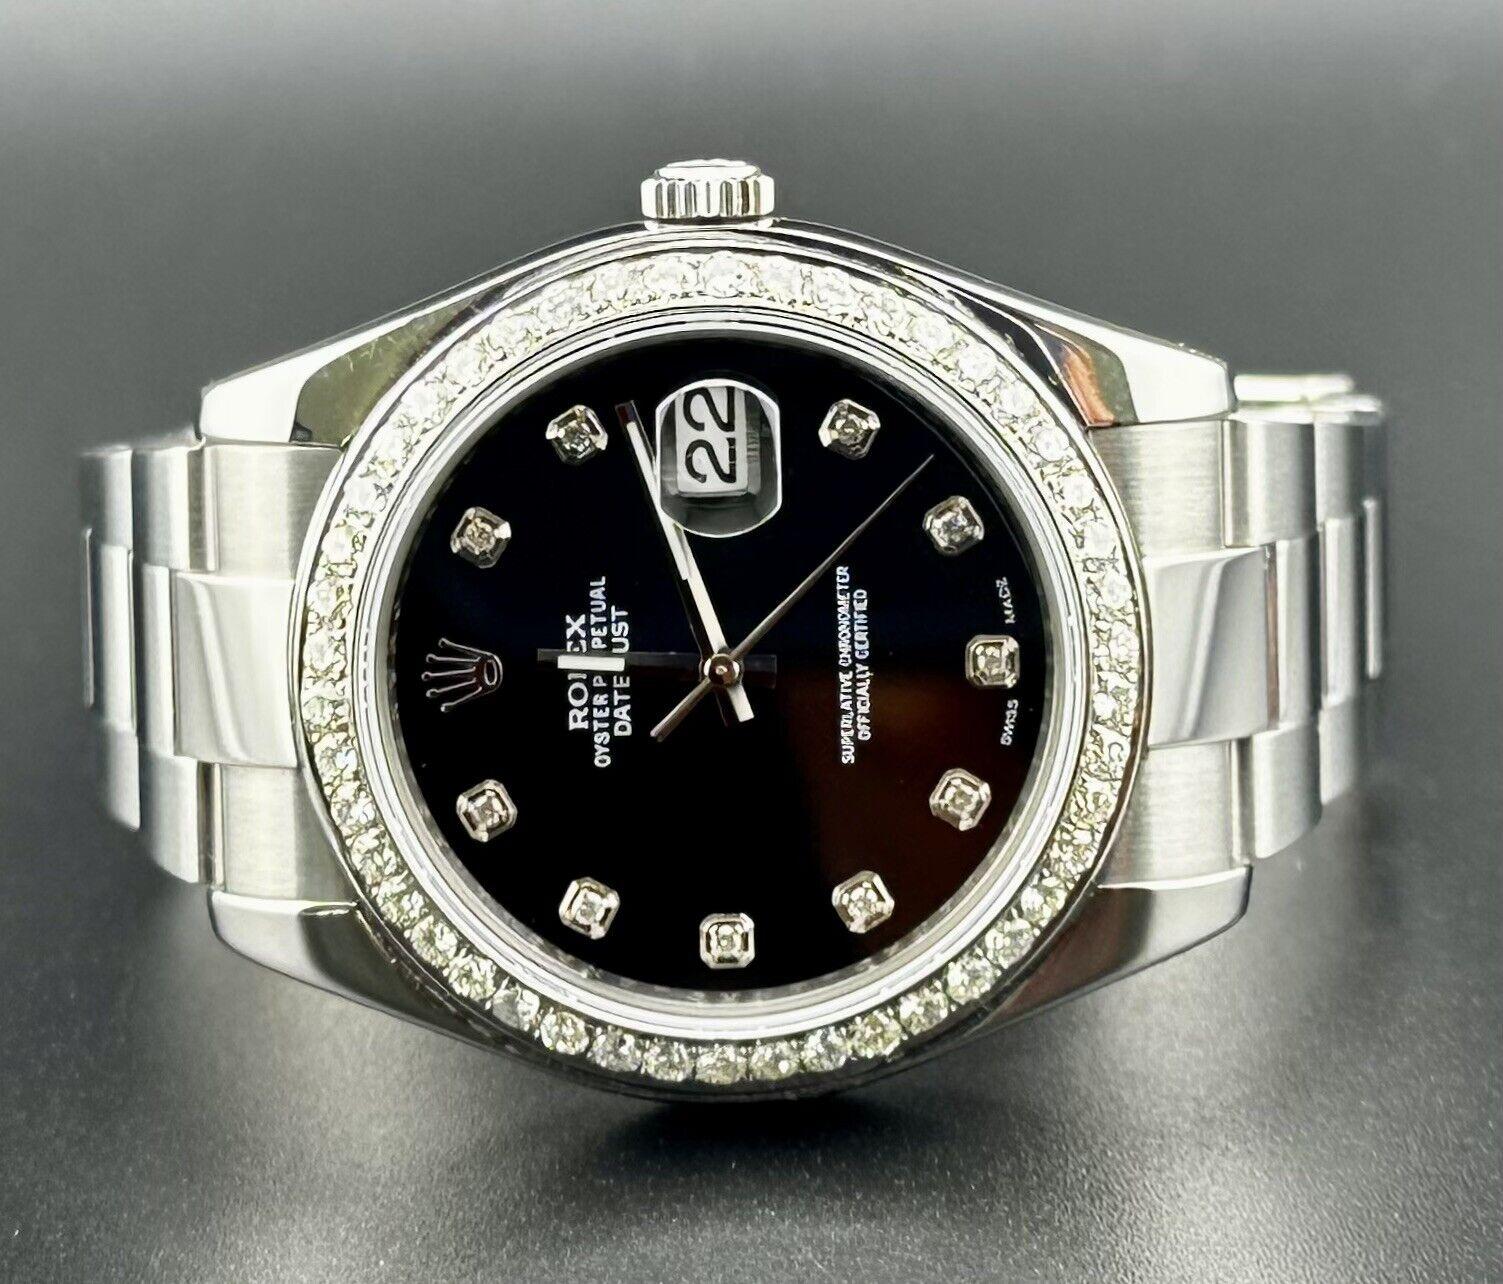 Rolex Datejust 41mm Watch. A Pre-owned watch w/ Gift Box. The Watch Itself is Authentic and Comes with Authenticity Card. Watch Reference is 116300 and is in Excellent Condition (See Pictures). The dial color is Black (Have Other Colors!) and